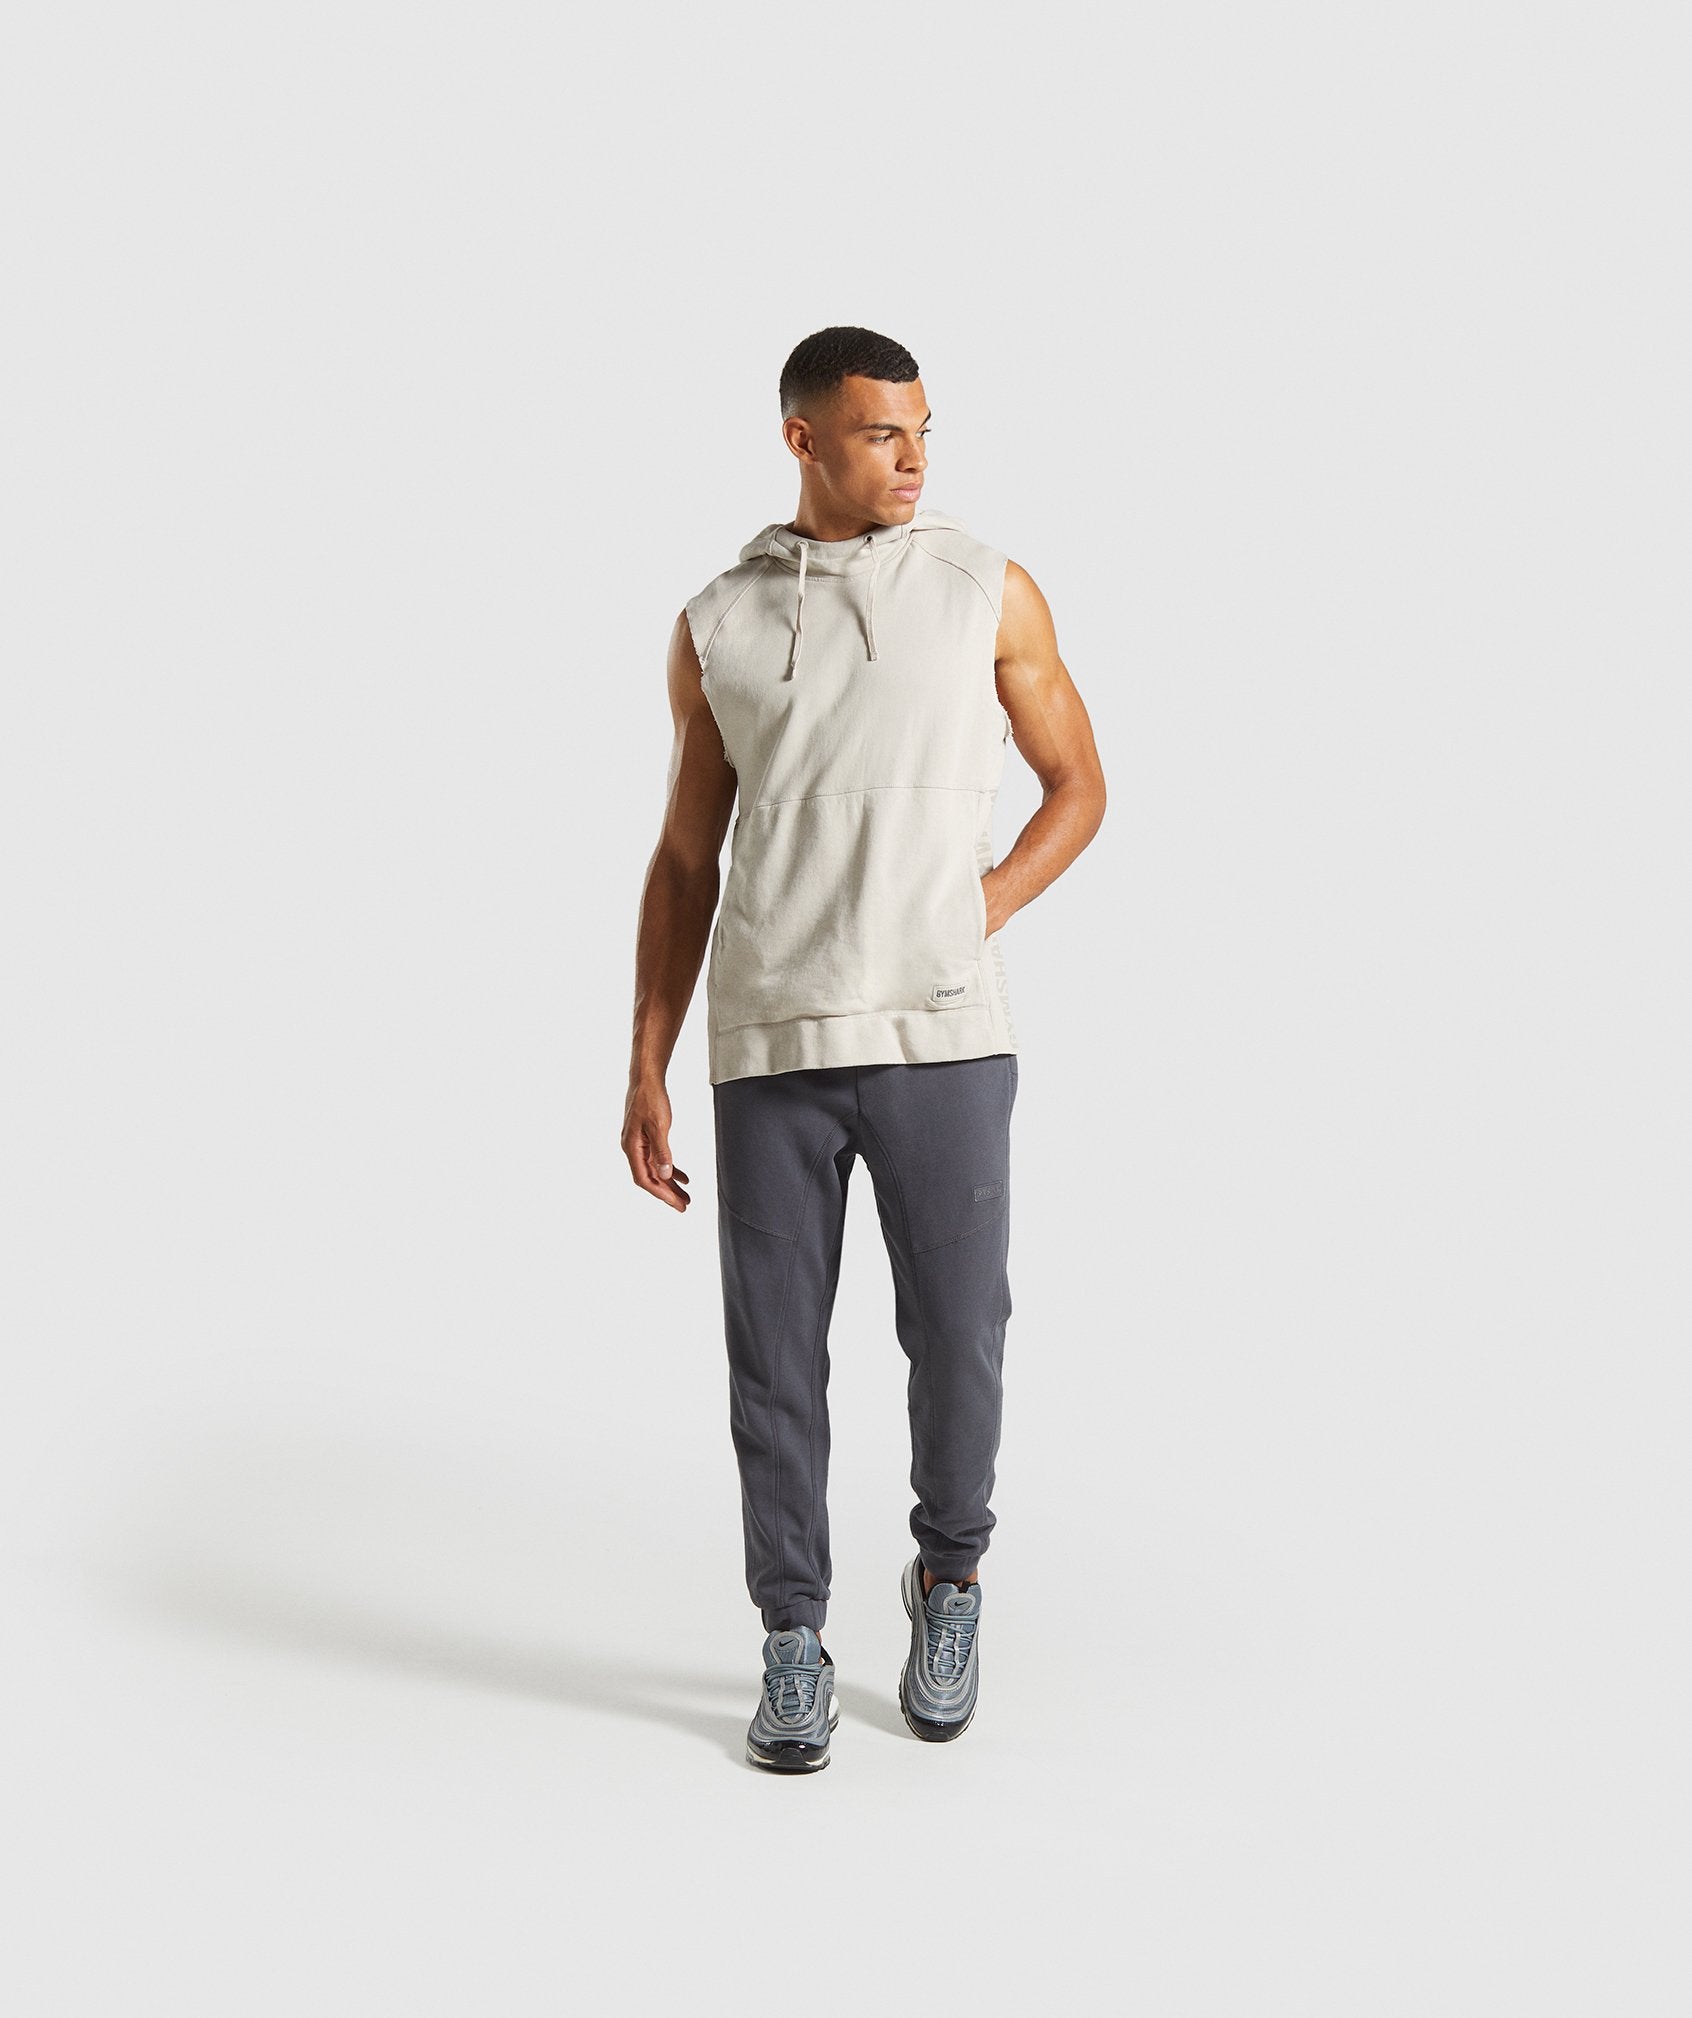 Laundered Sleeveless Hoodie in Chalk Grey - view 4